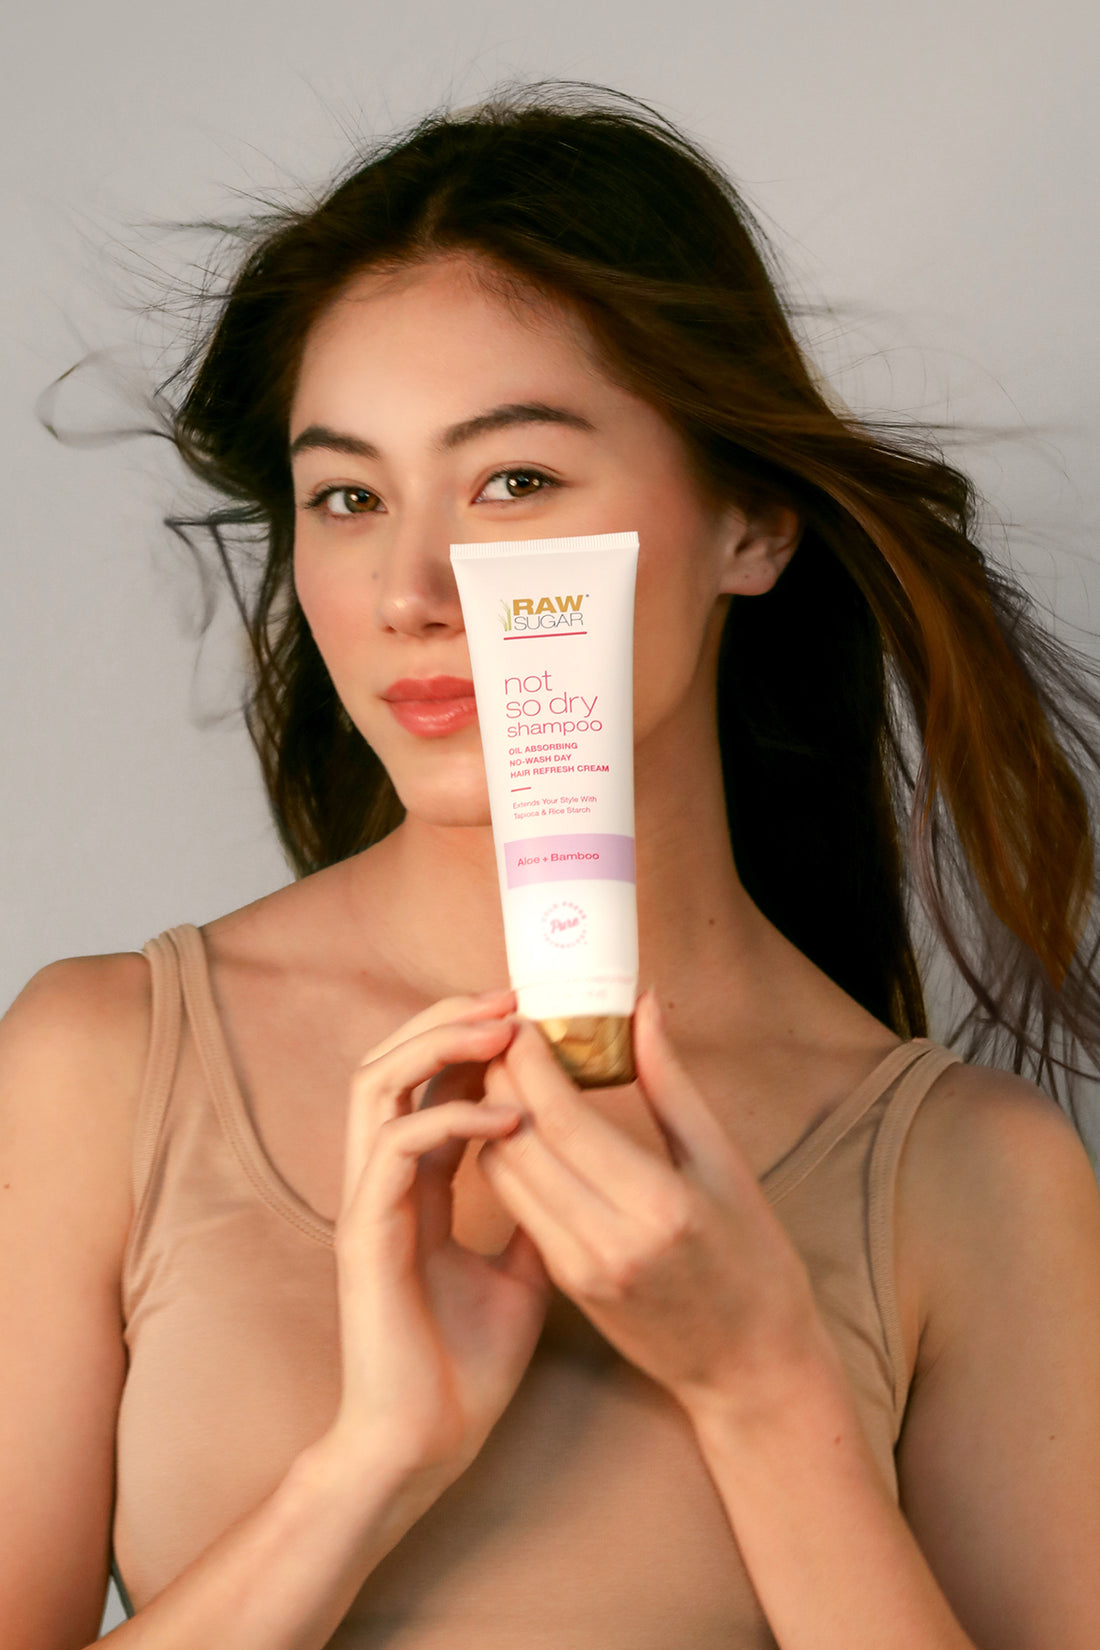 asian woman holding bottle of dry shampoo